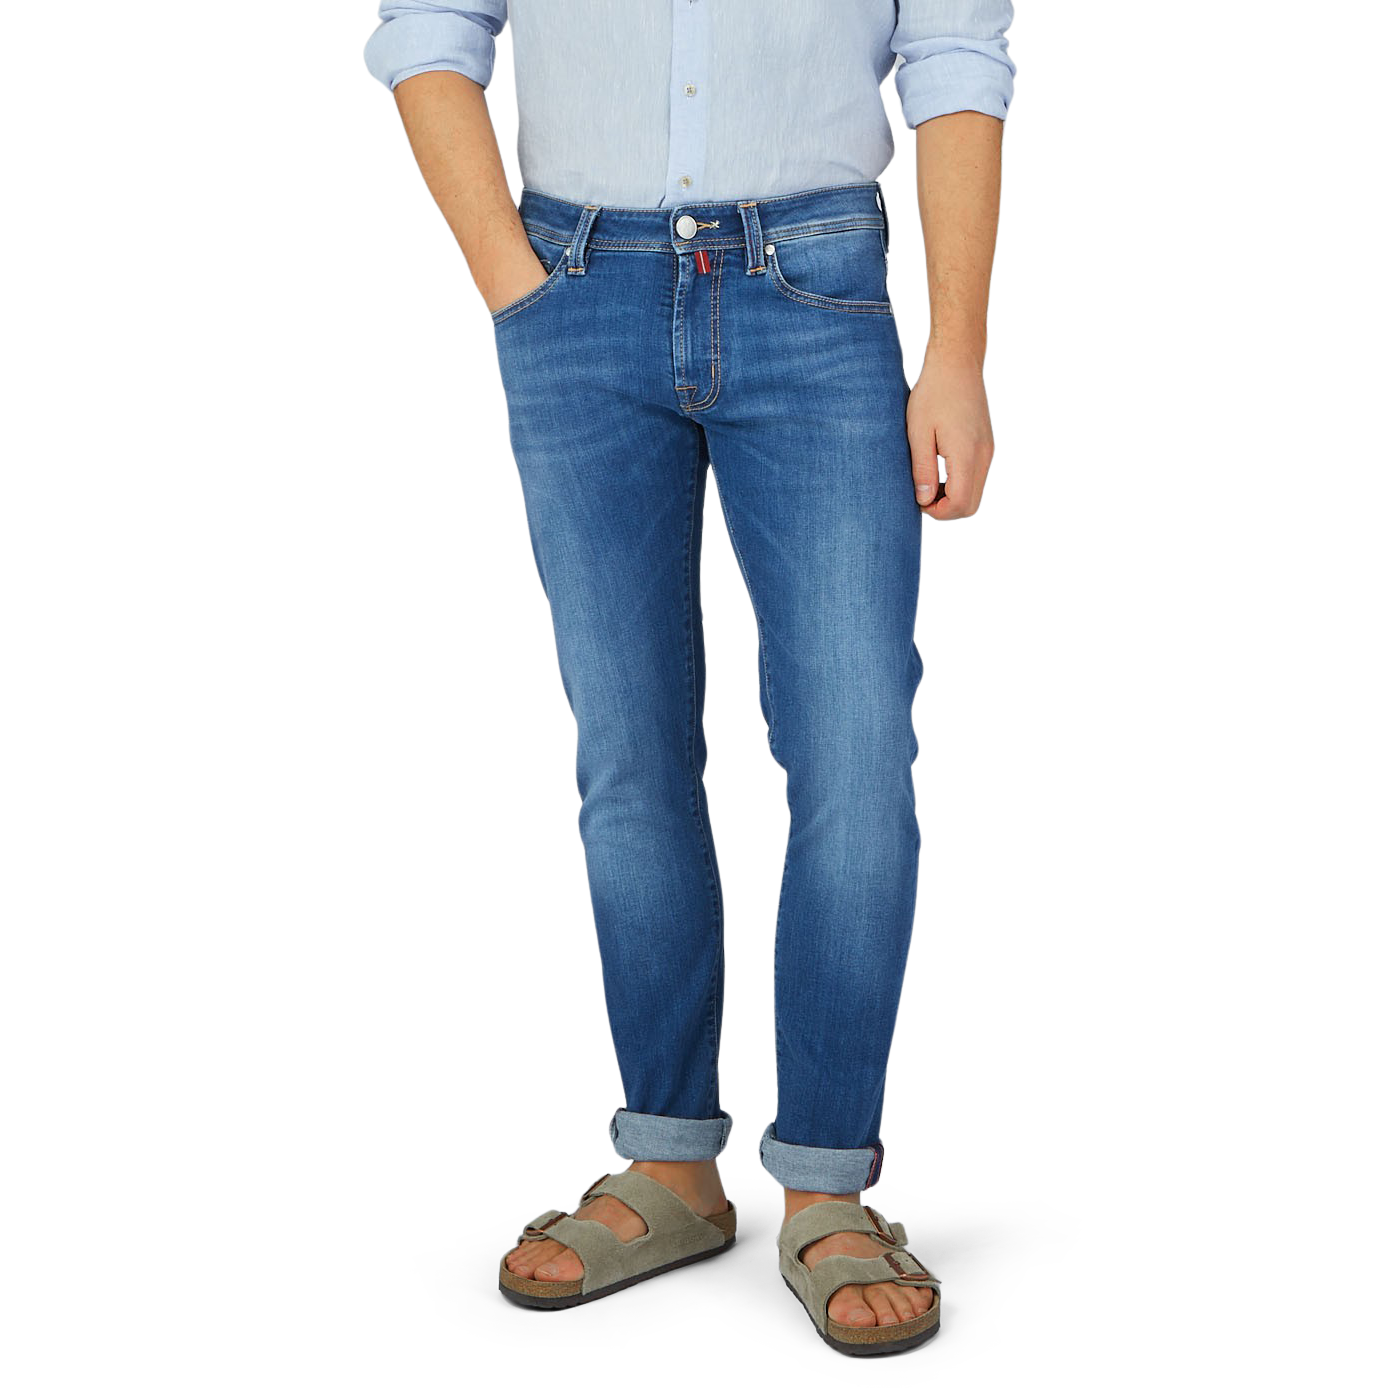 A man in Tramarossa Washed Blue Leonardo 6 Months Jeans and sandals for comfort.